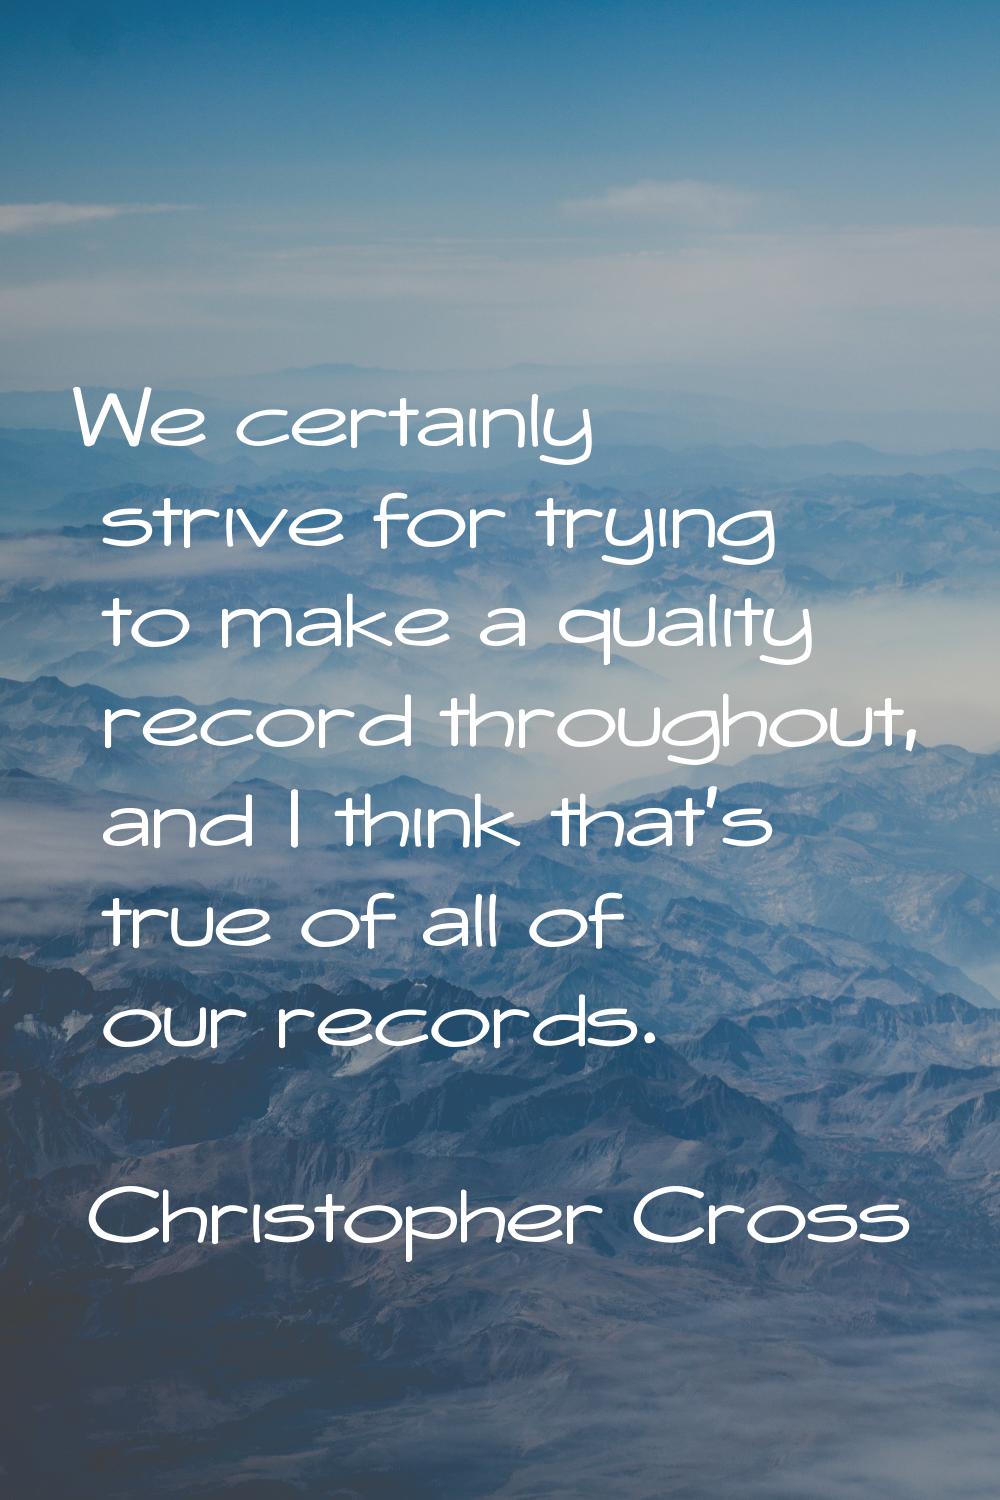 We certainly strive for trying to make a quality record throughout, and I think that's true of all 